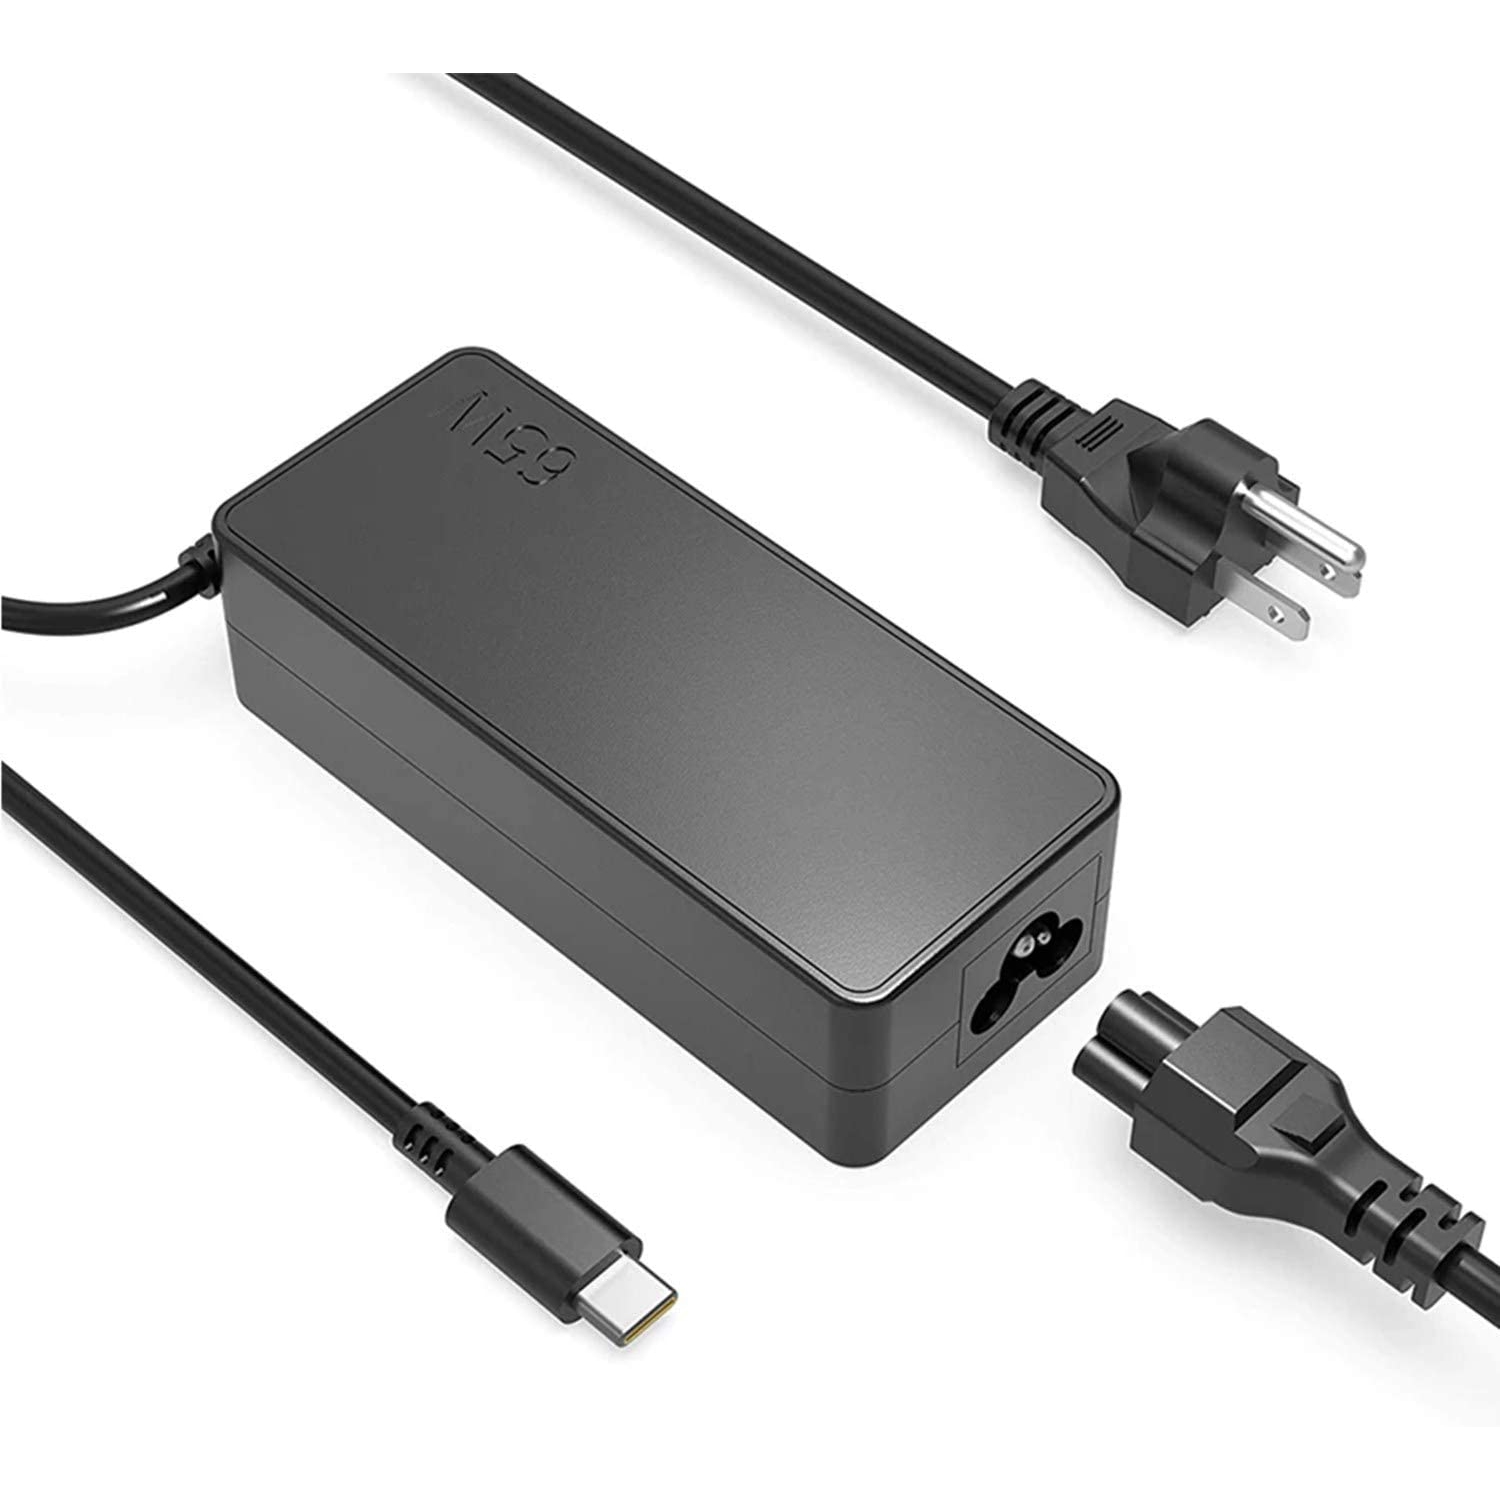 Type-C Laptop Charger 65W for Lenovo Adapter: Chromebook C330 S330 100e Yoga C930 C940 S730 720 730 910 920 13 IdeaPad